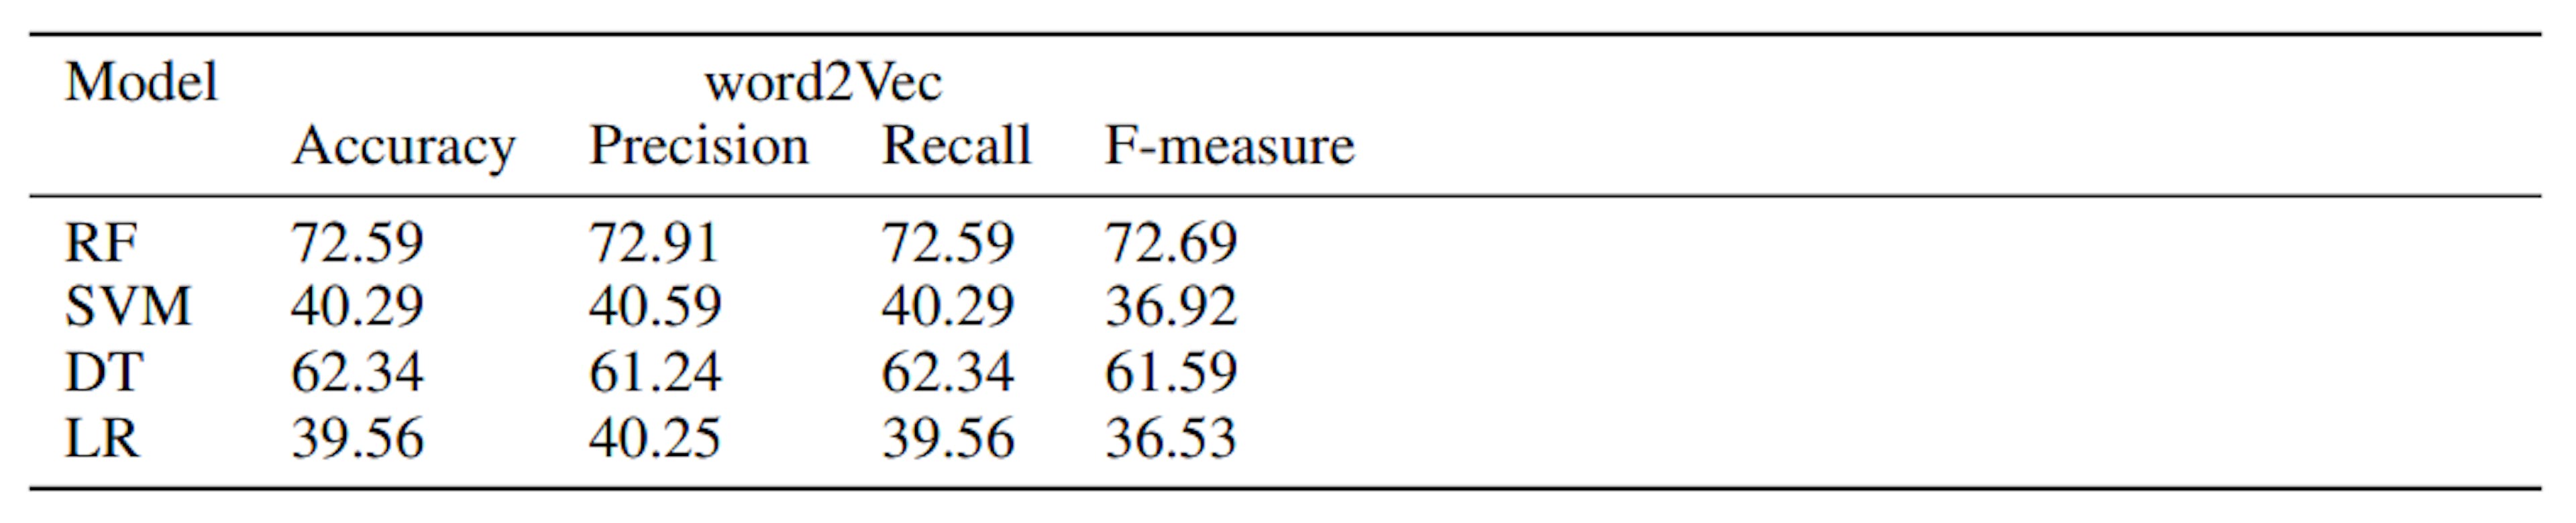 Table 3: Precision, Recall, Accuracy, and F-Measure values for word2Vec